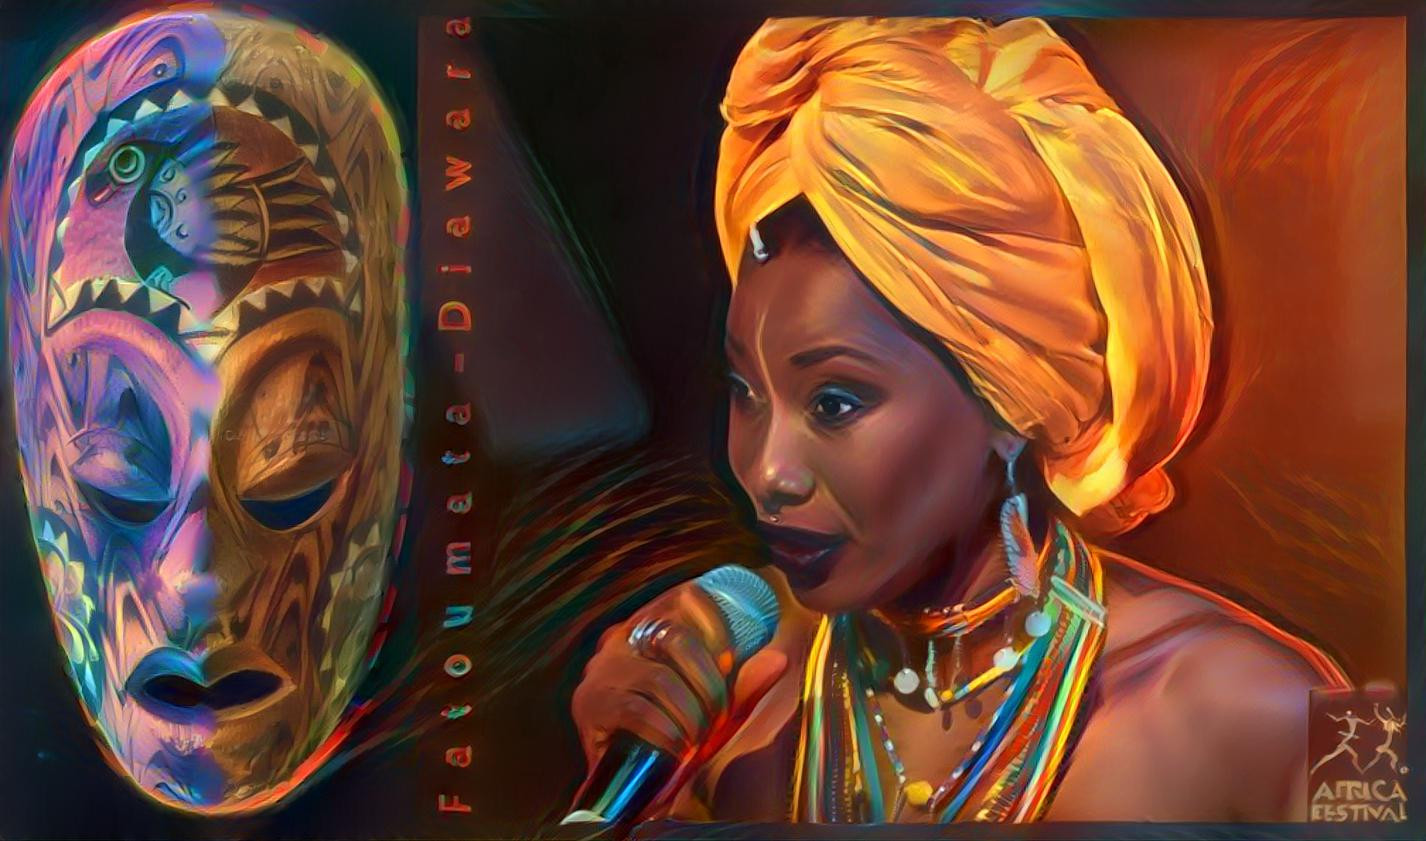 My fan page creation for the lovely and talented singer Fatoumata Diawara.